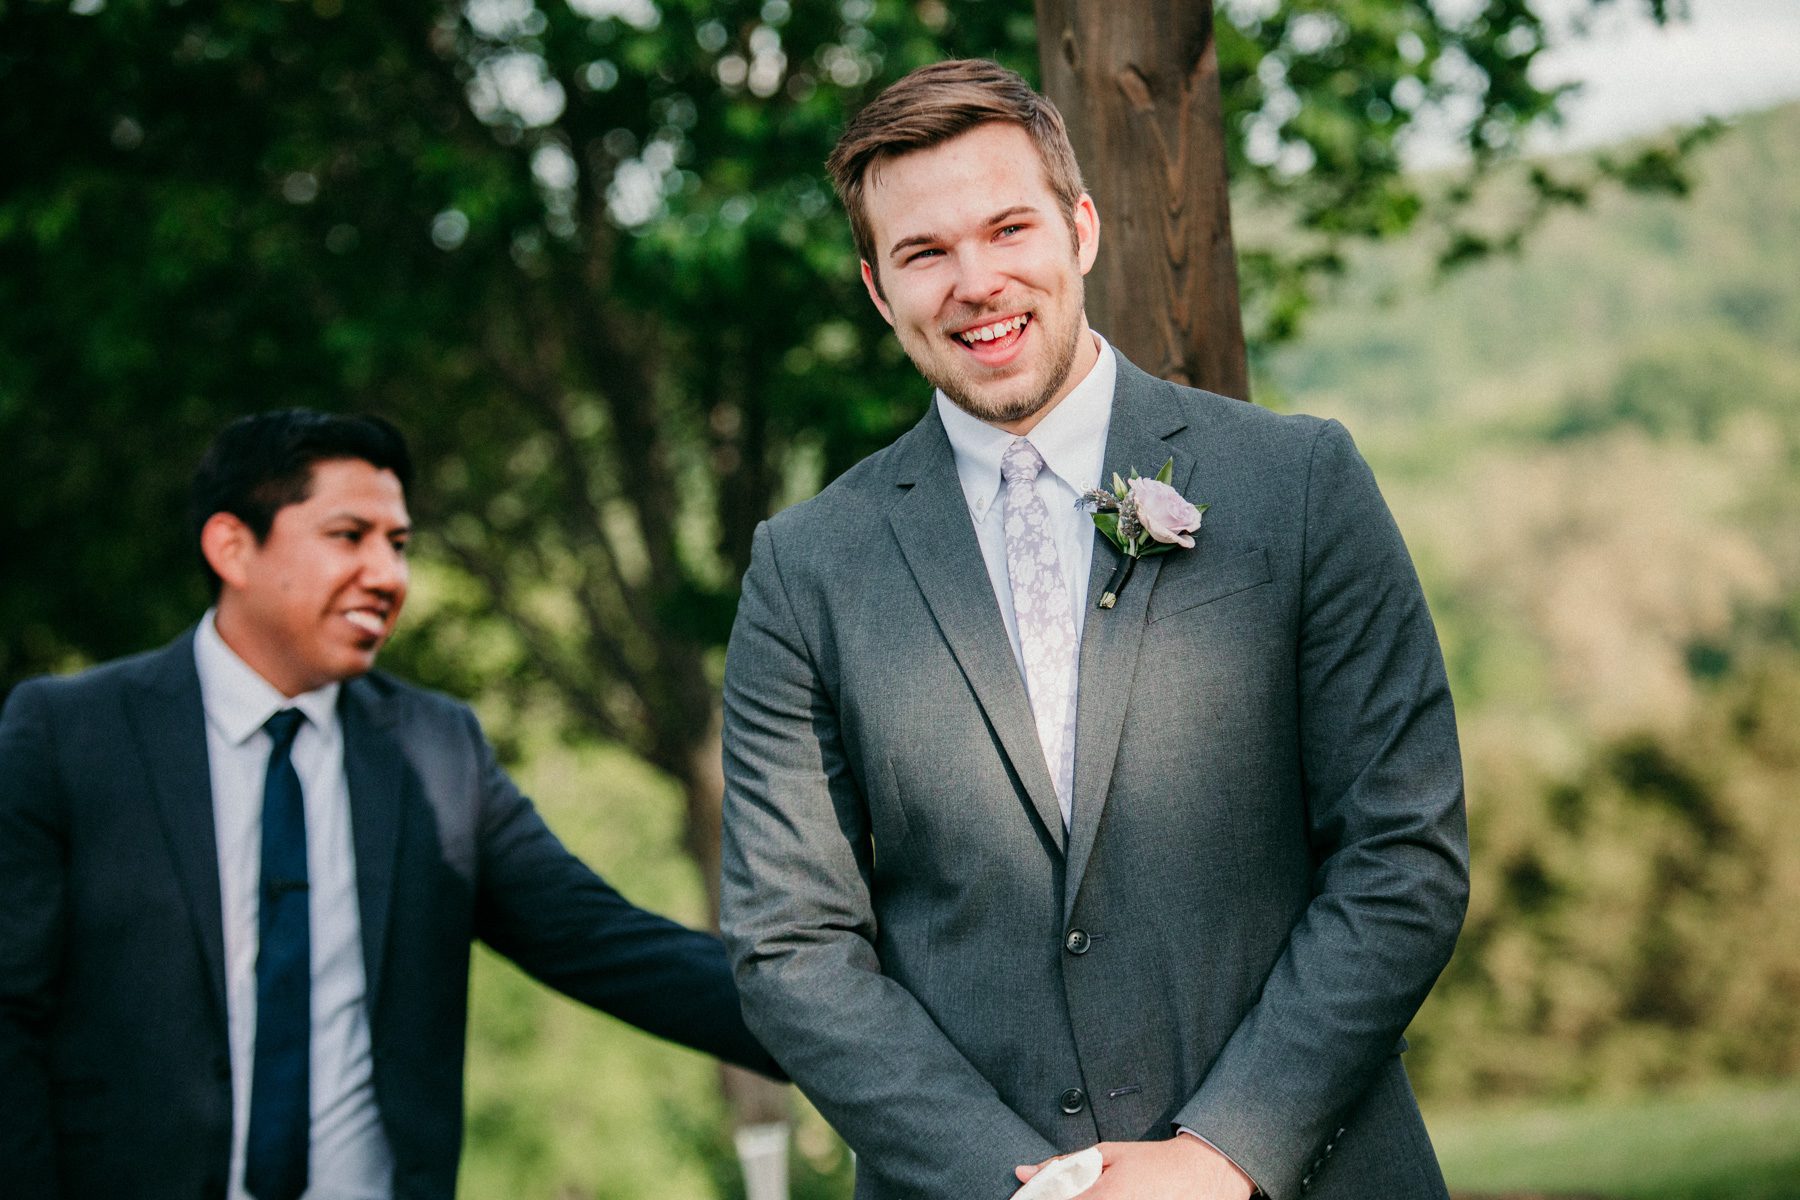 Groom sees bride for the first time on wedding day 